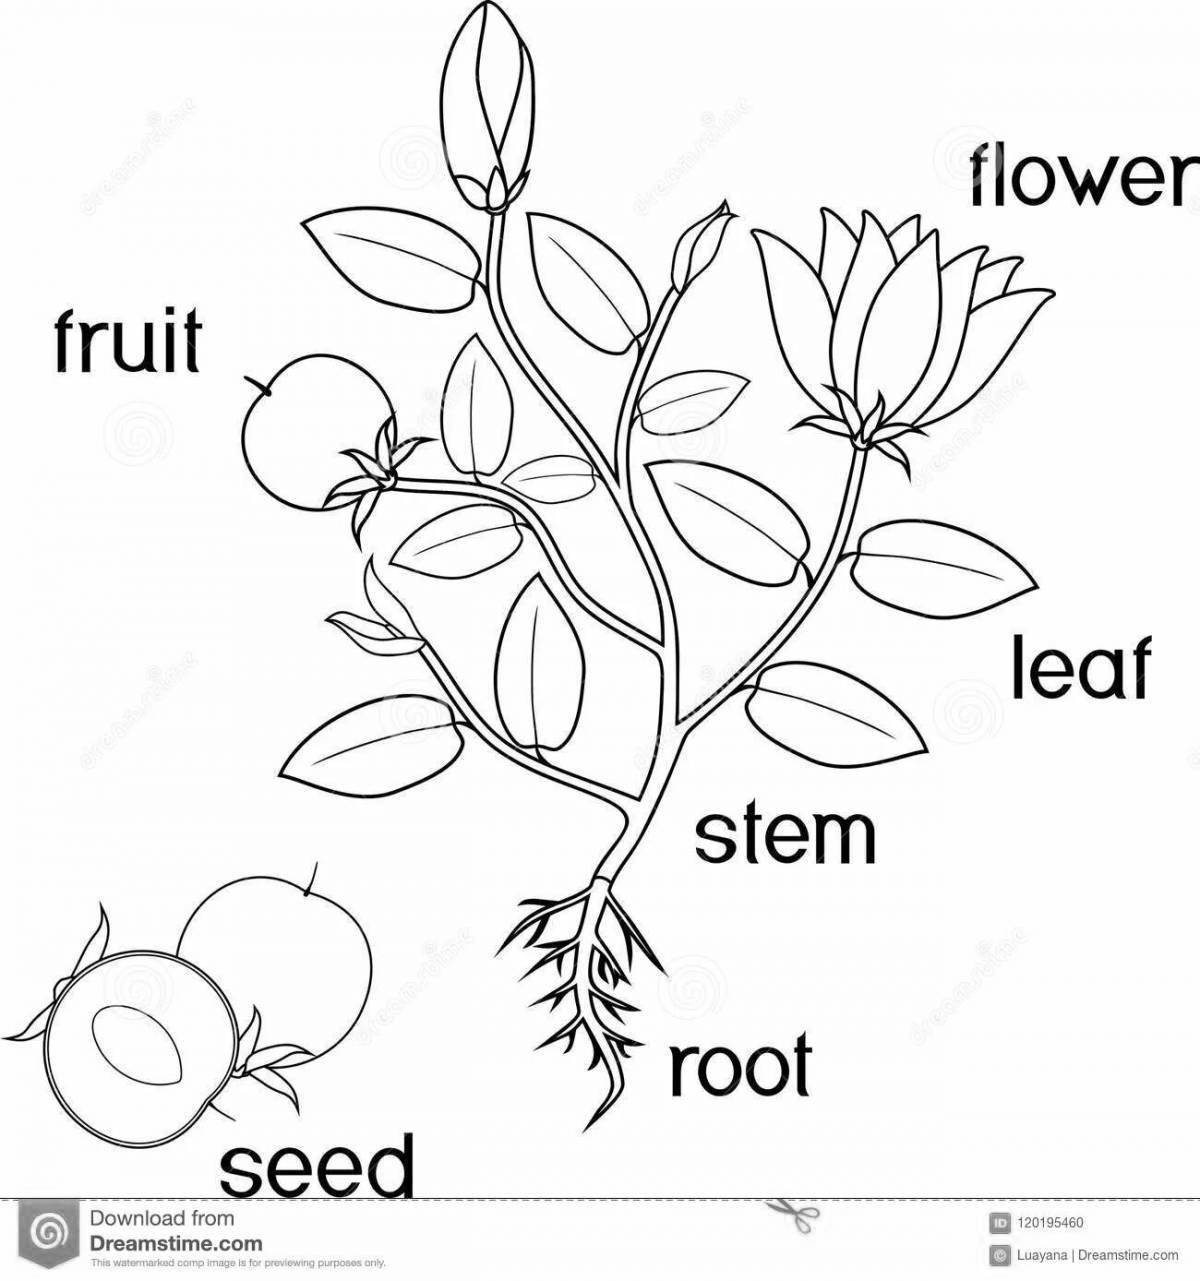 Fun parts of plants for 1st grade kids